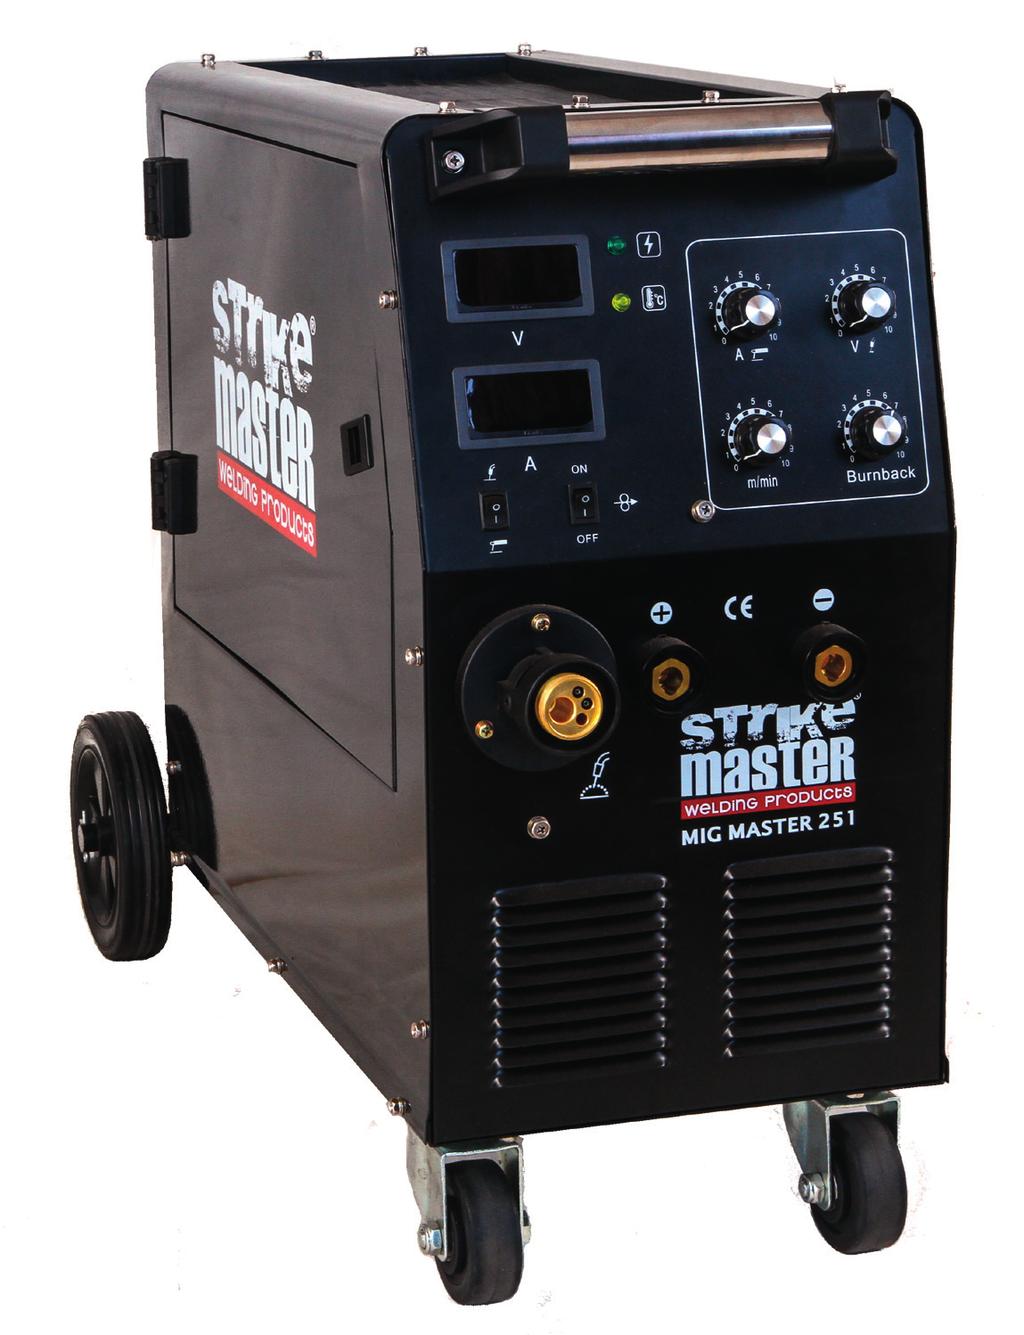 INVERTER SMMIG 251 The SMMIG 251 is a single phase 220V MIG (Metal Inert Gas) and MMA (Manual Metal Arc) welder designed and manufactured using the latest digital inverter